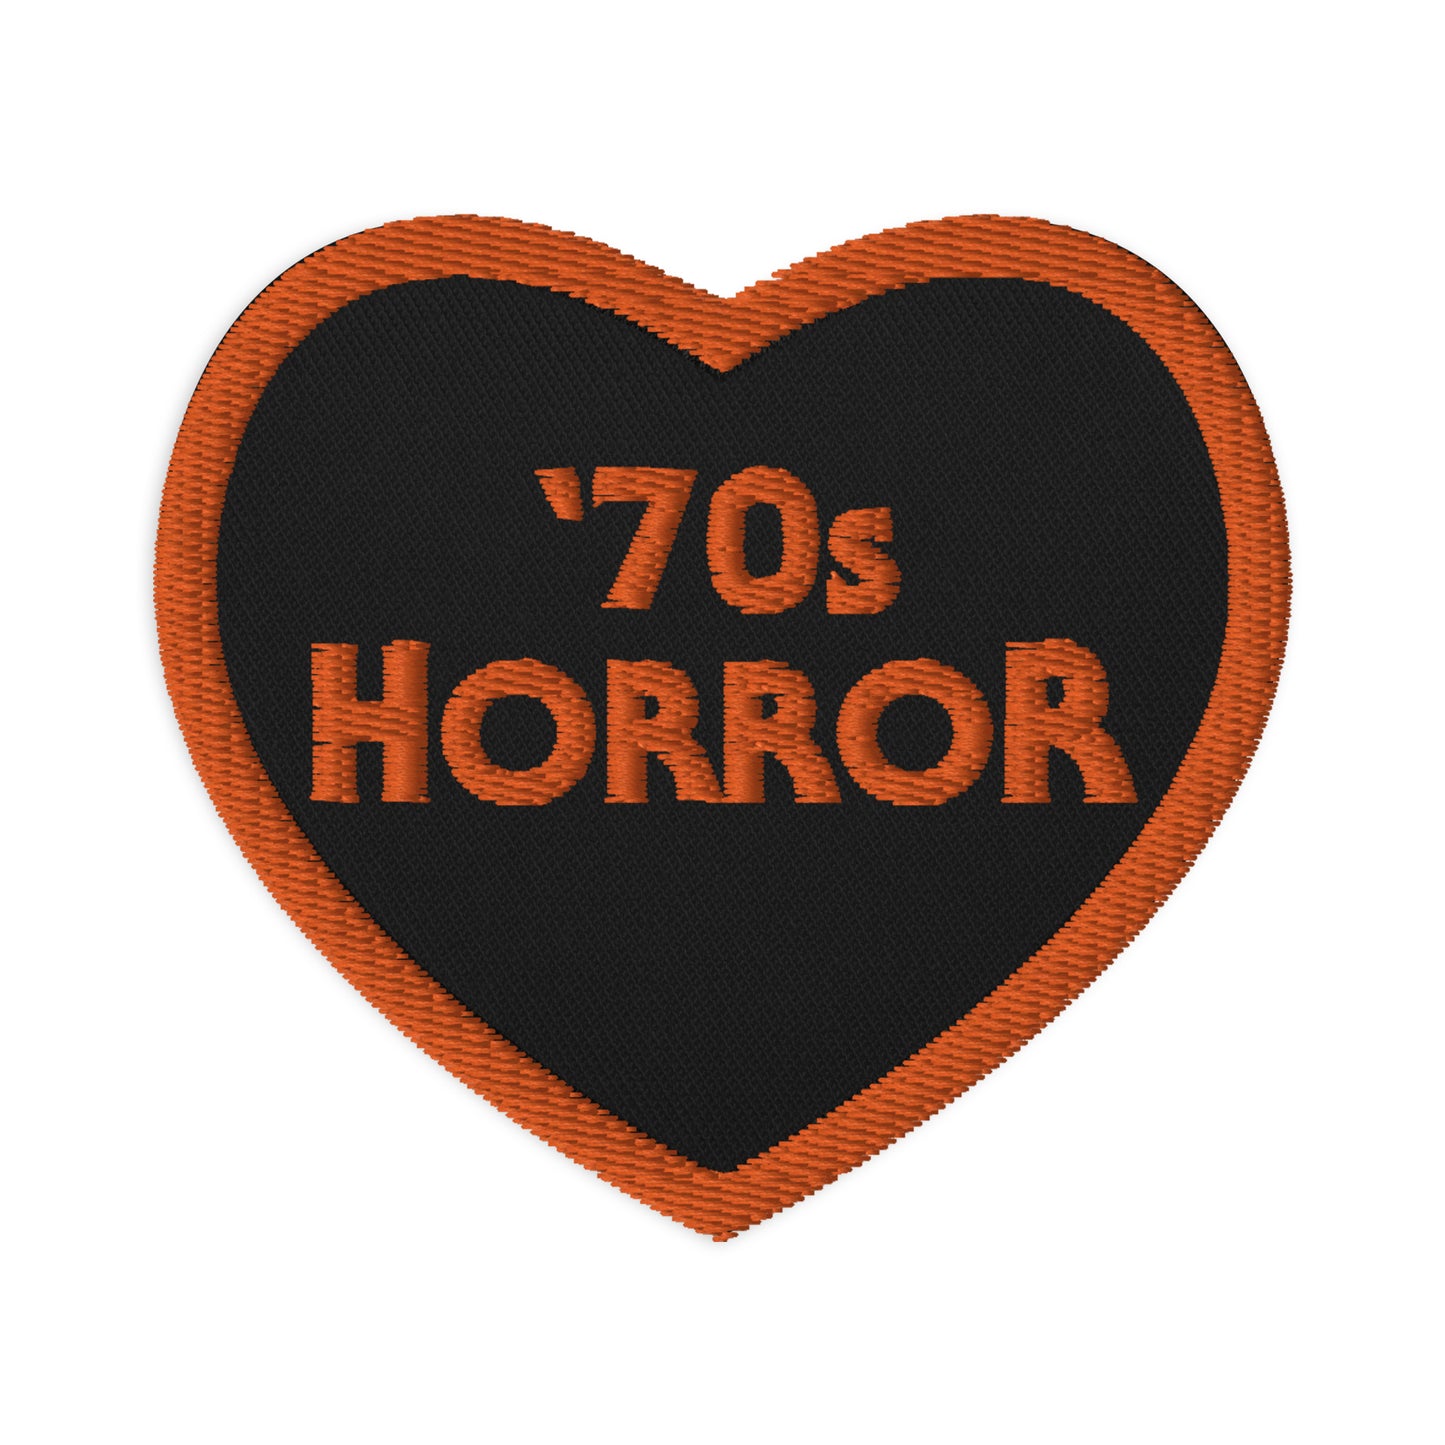 I Heart 70s Horror patch